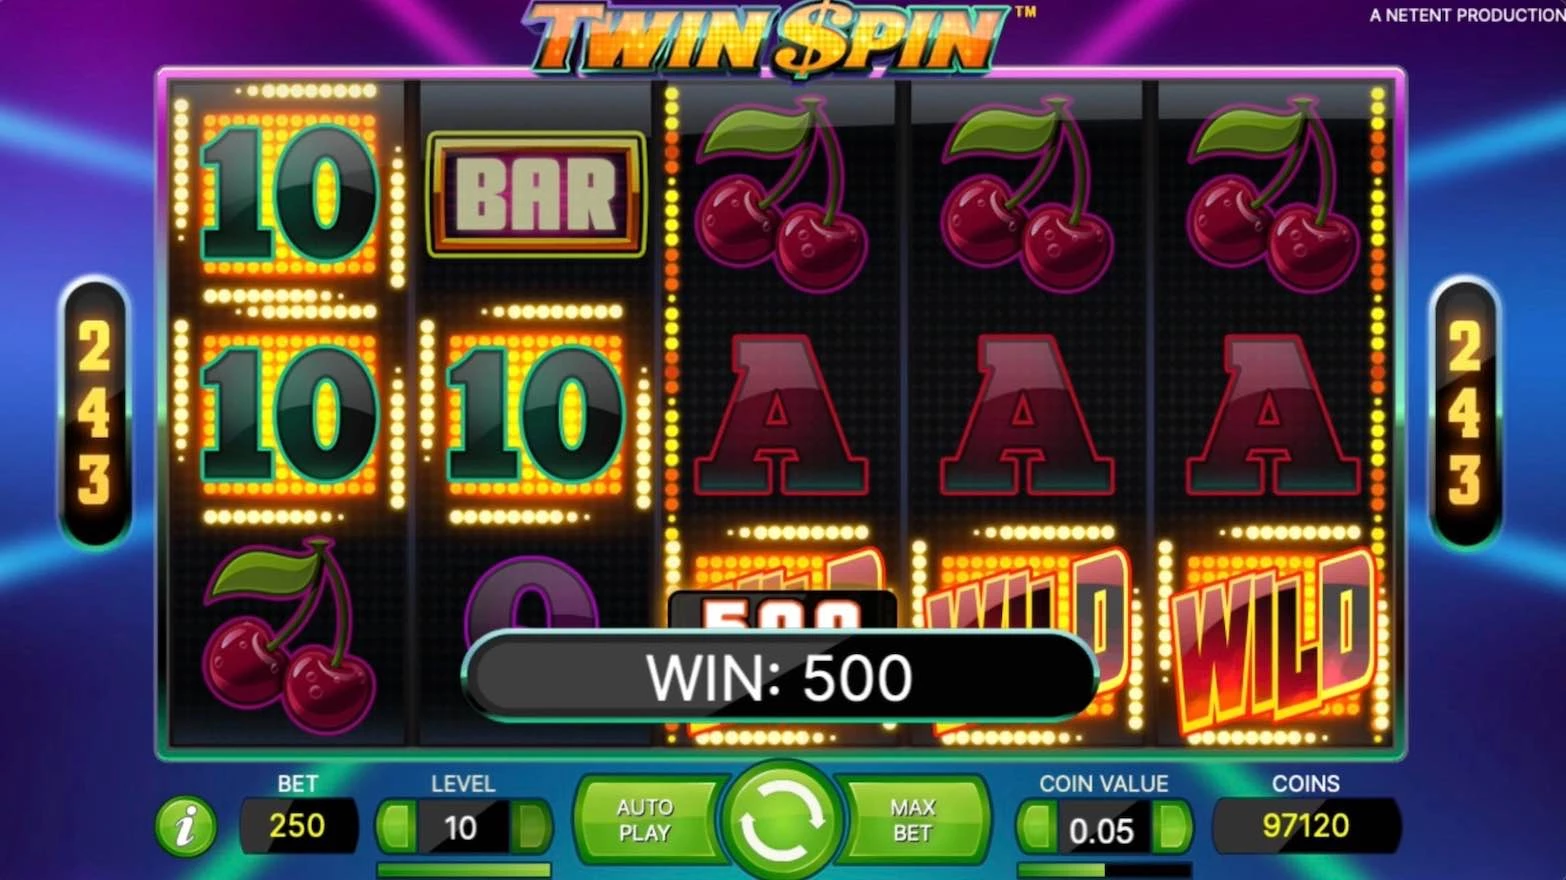 Twin Spin (NetEnt) Ten with Wild Won $500